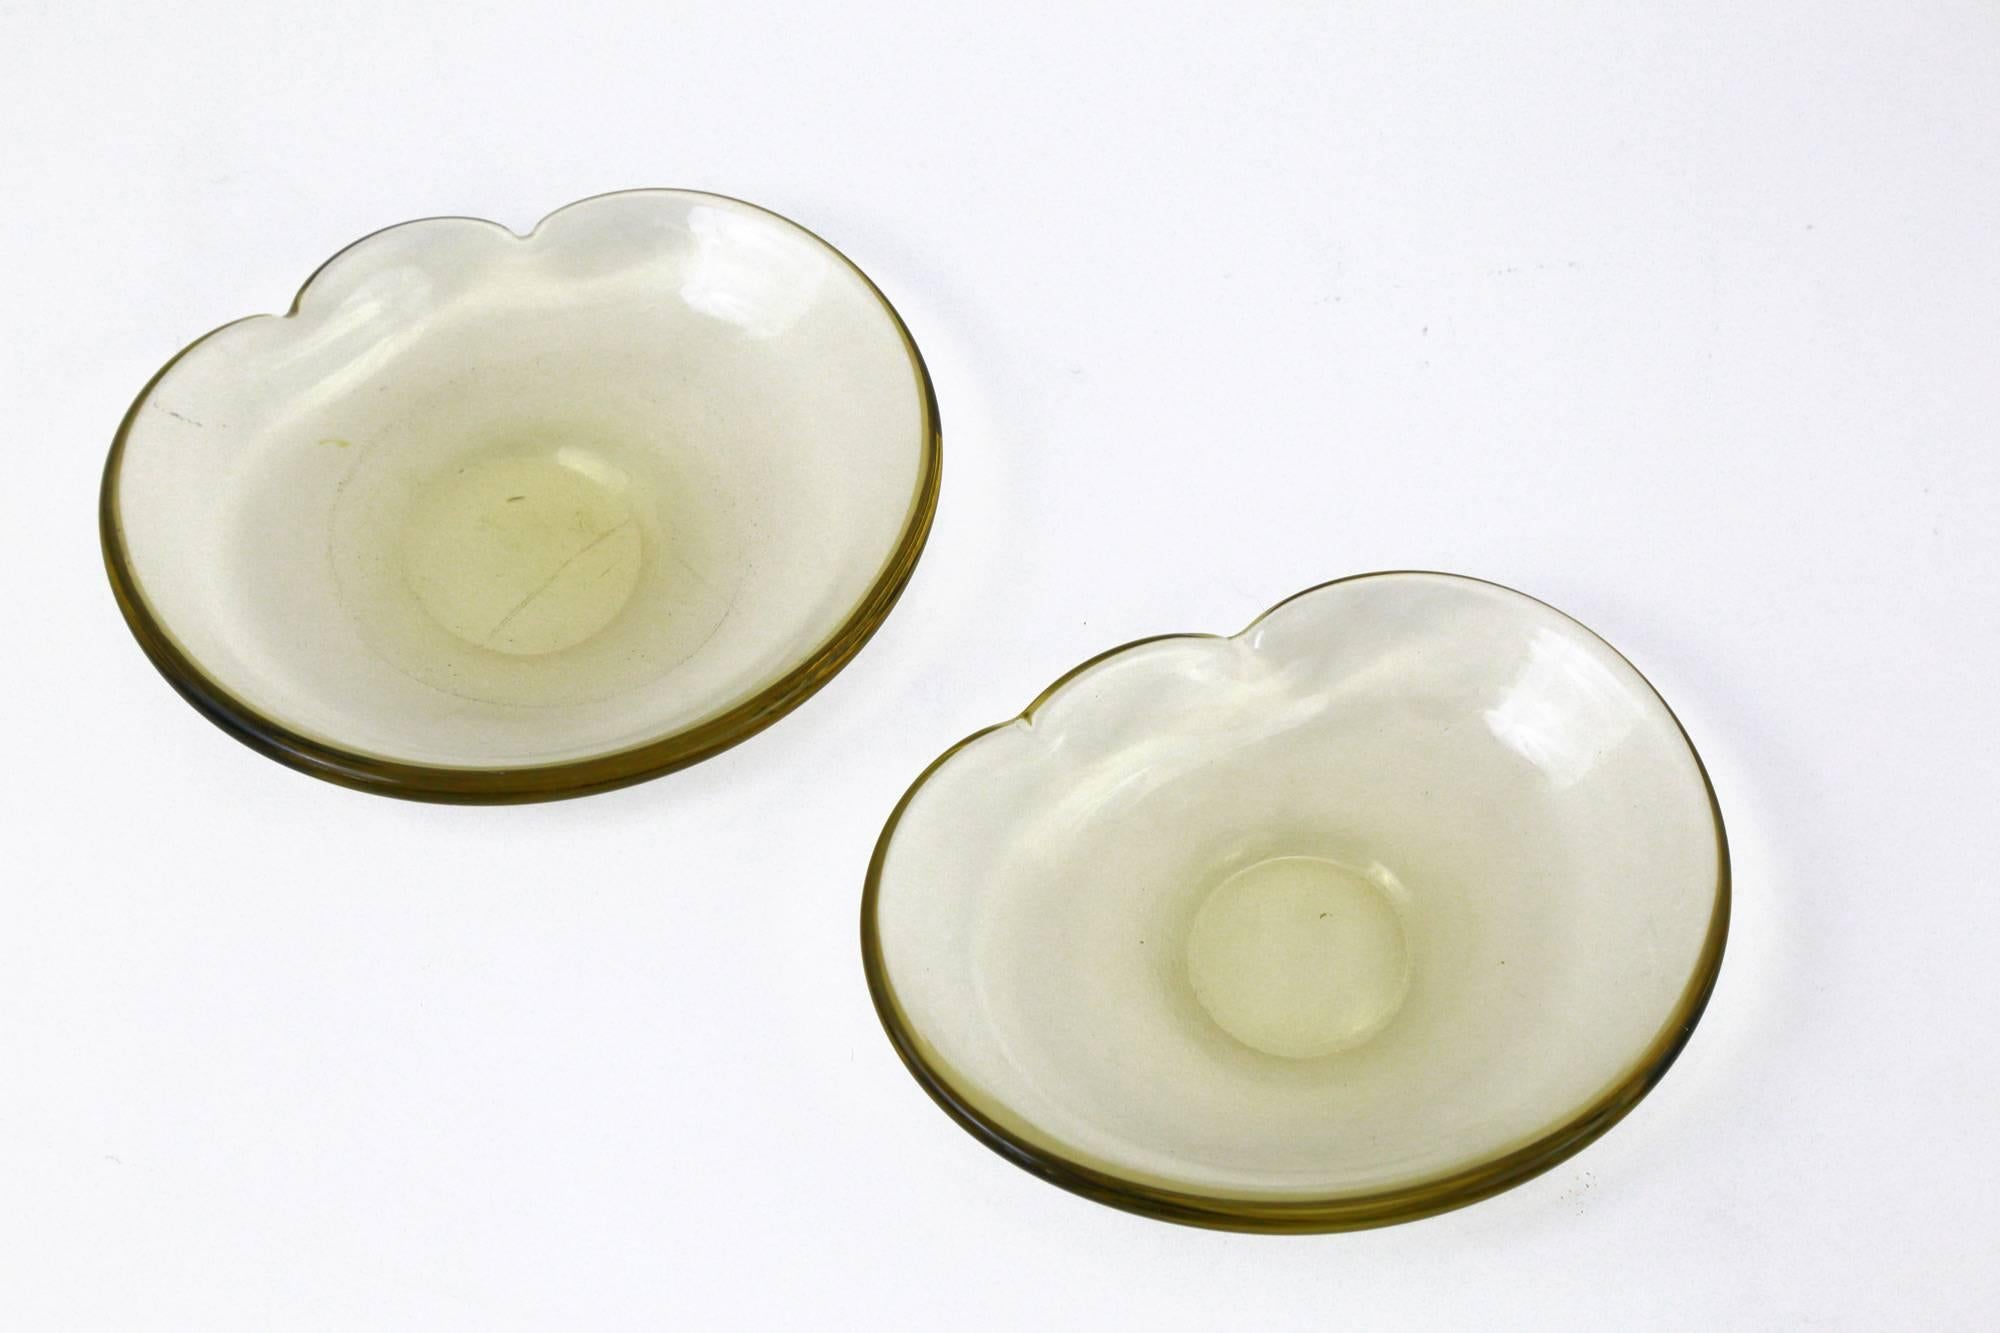 A pair of circa 1930 'pagliasco' glass dishes by the architect and designer Carlo Scarpa for the amazing Italian glass manufacturer, Venini. Oval in shape with a chic yello/green hue, these beautiful hand blown dishes each feature two stylish